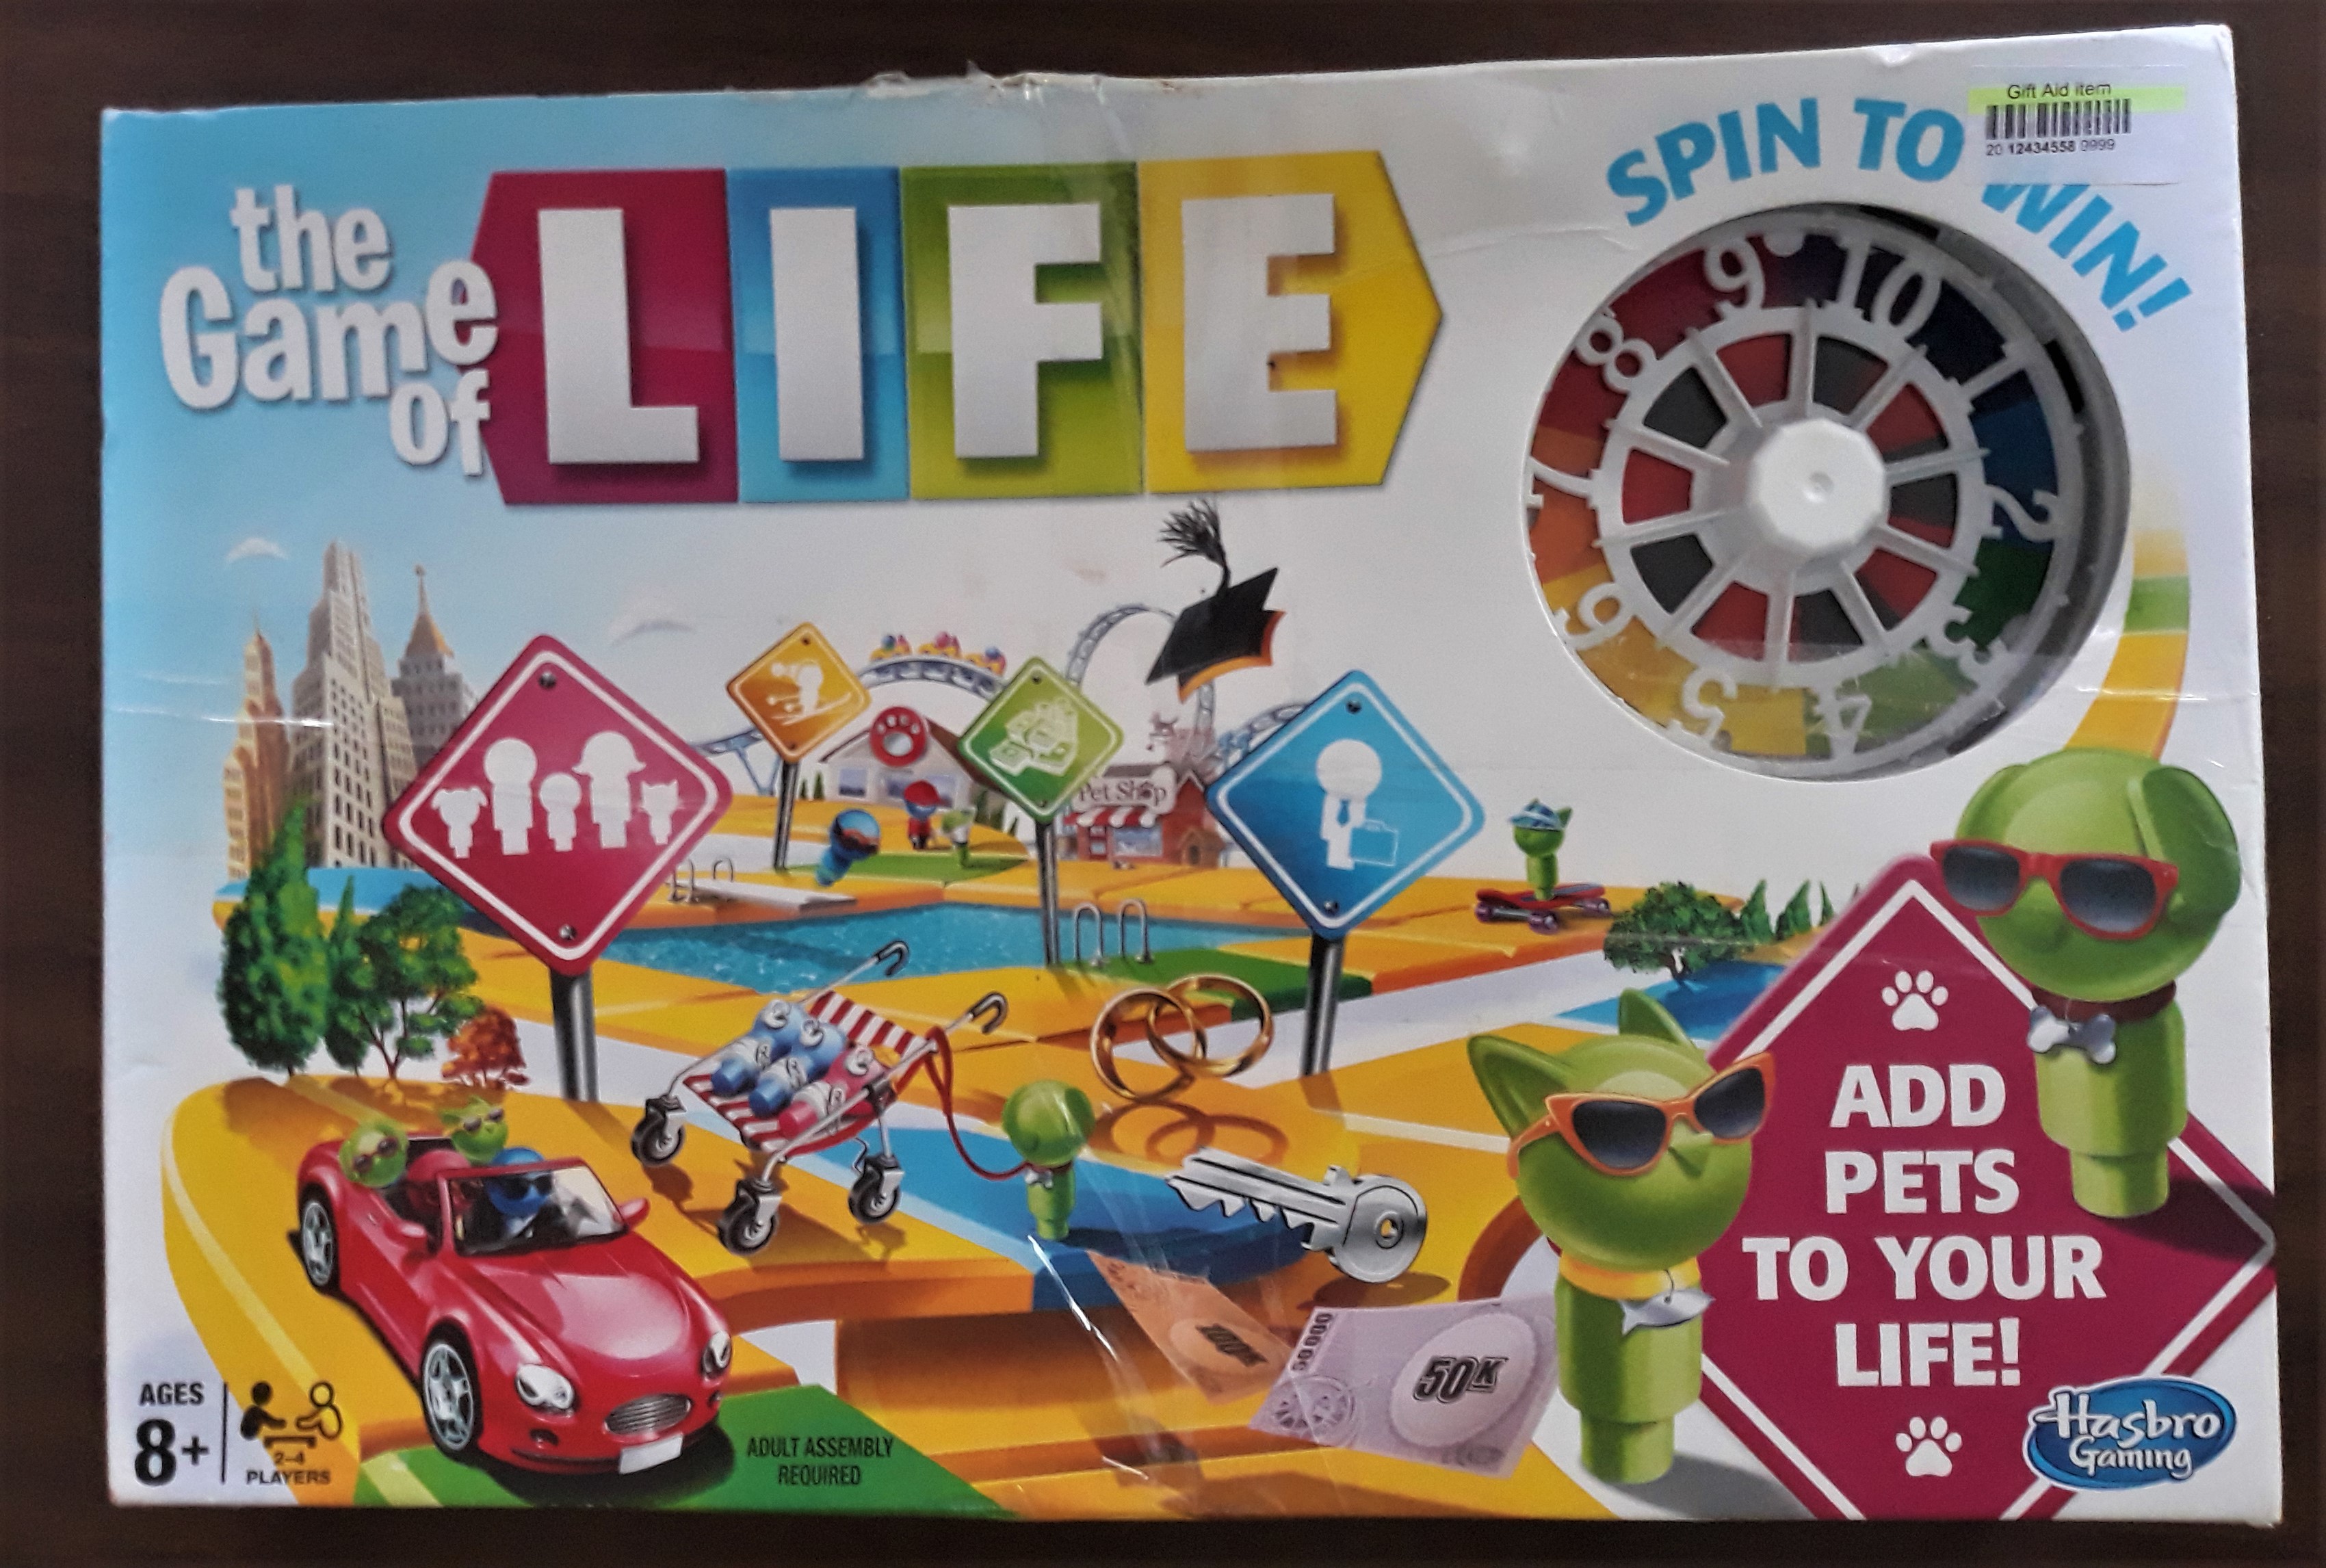 The Game of Life Board Game Review – Hands-On Parent while Earning